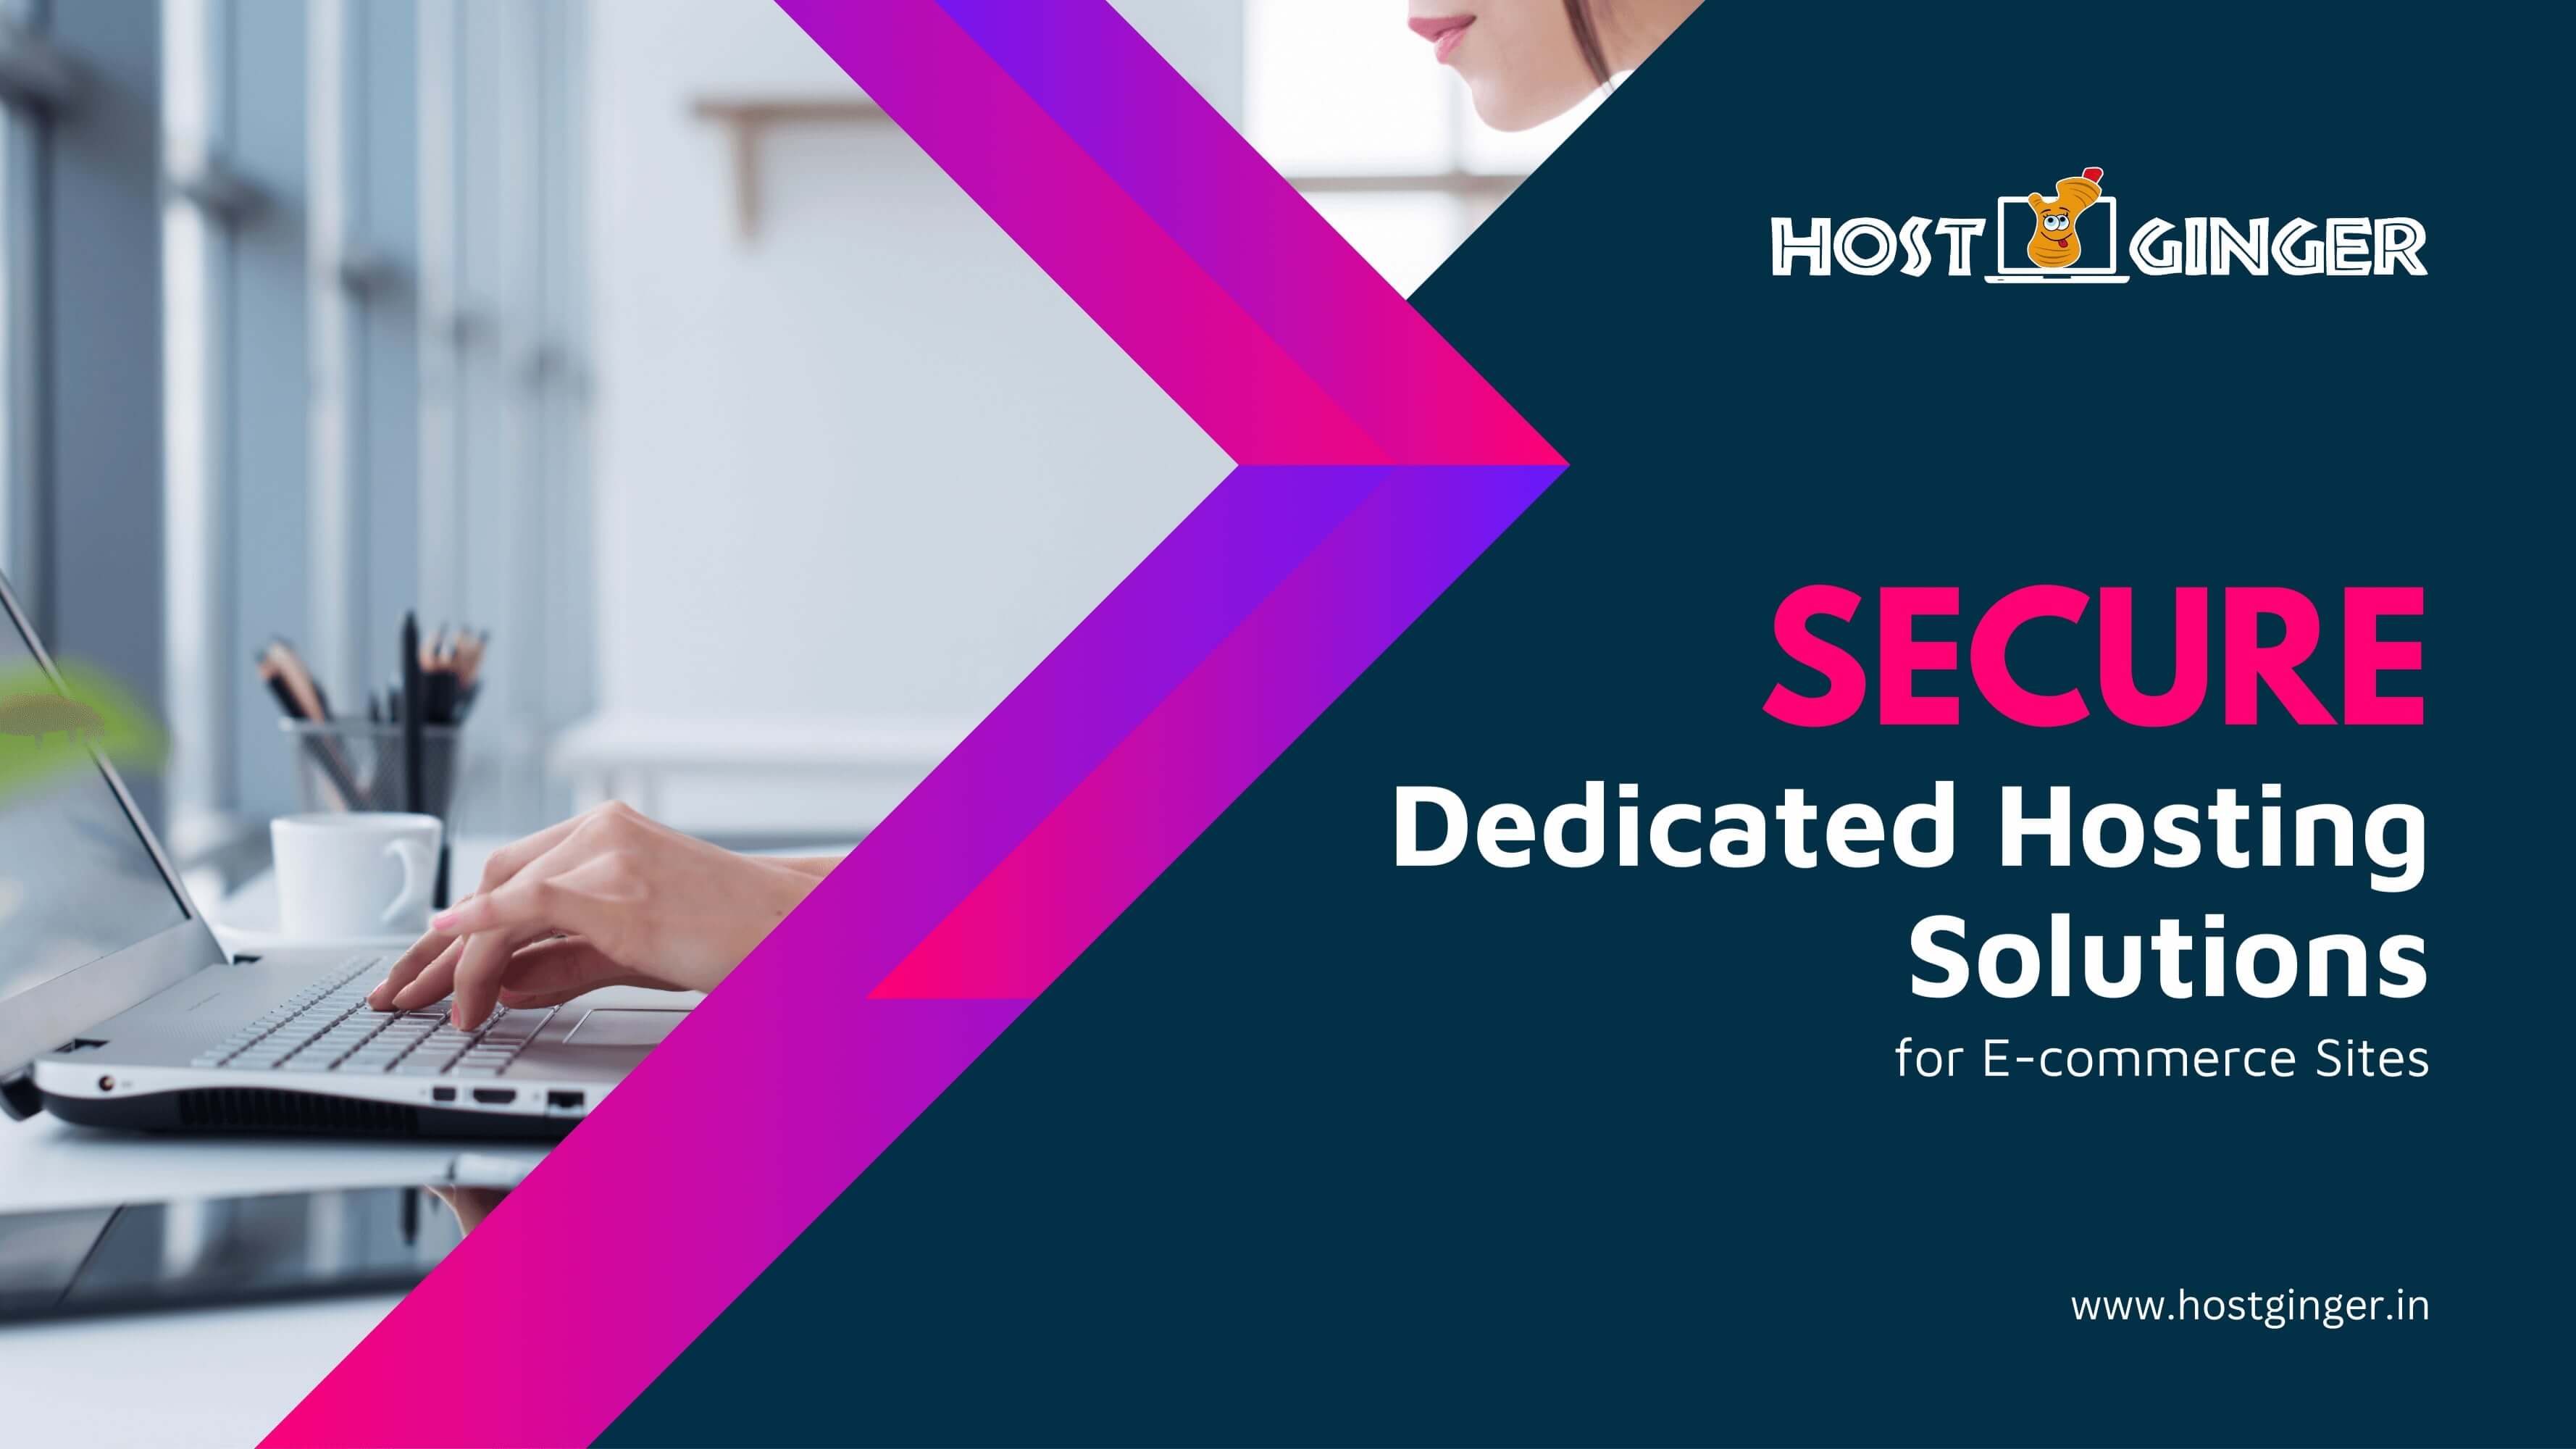 Secure Dedicated Hosting Solutions for E-commerce Sites